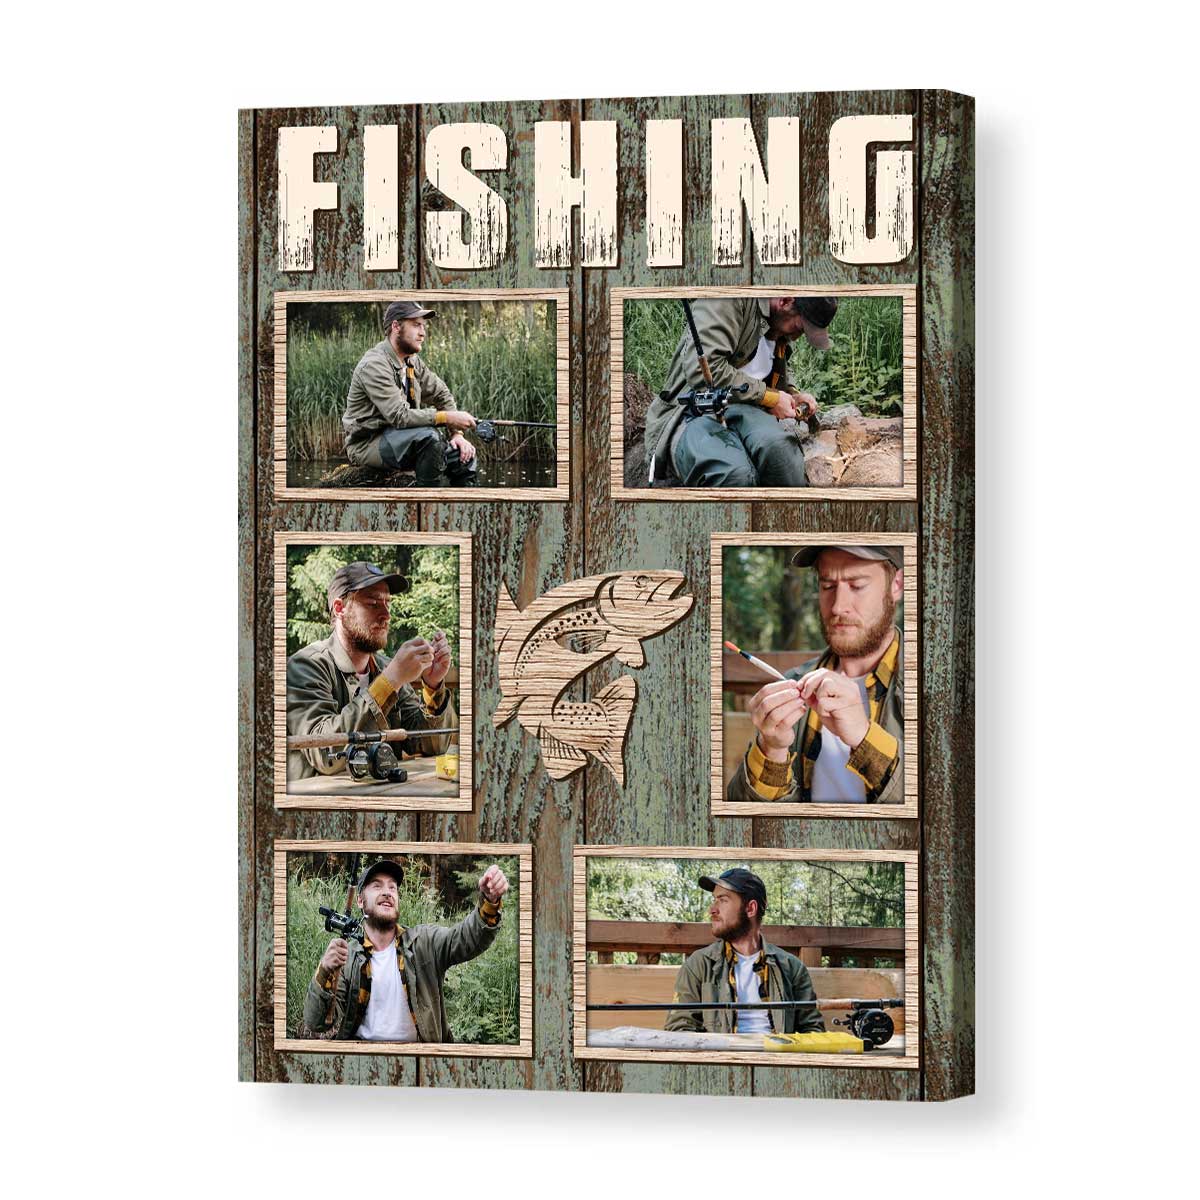 https://benicee.com/wp-content/uploads/2022/09/Custom-Fishing-Photo-Collage-Canvas-Best-Gifts-For-Fisherman-Fishing-Gifts-For-Men-2.jpg